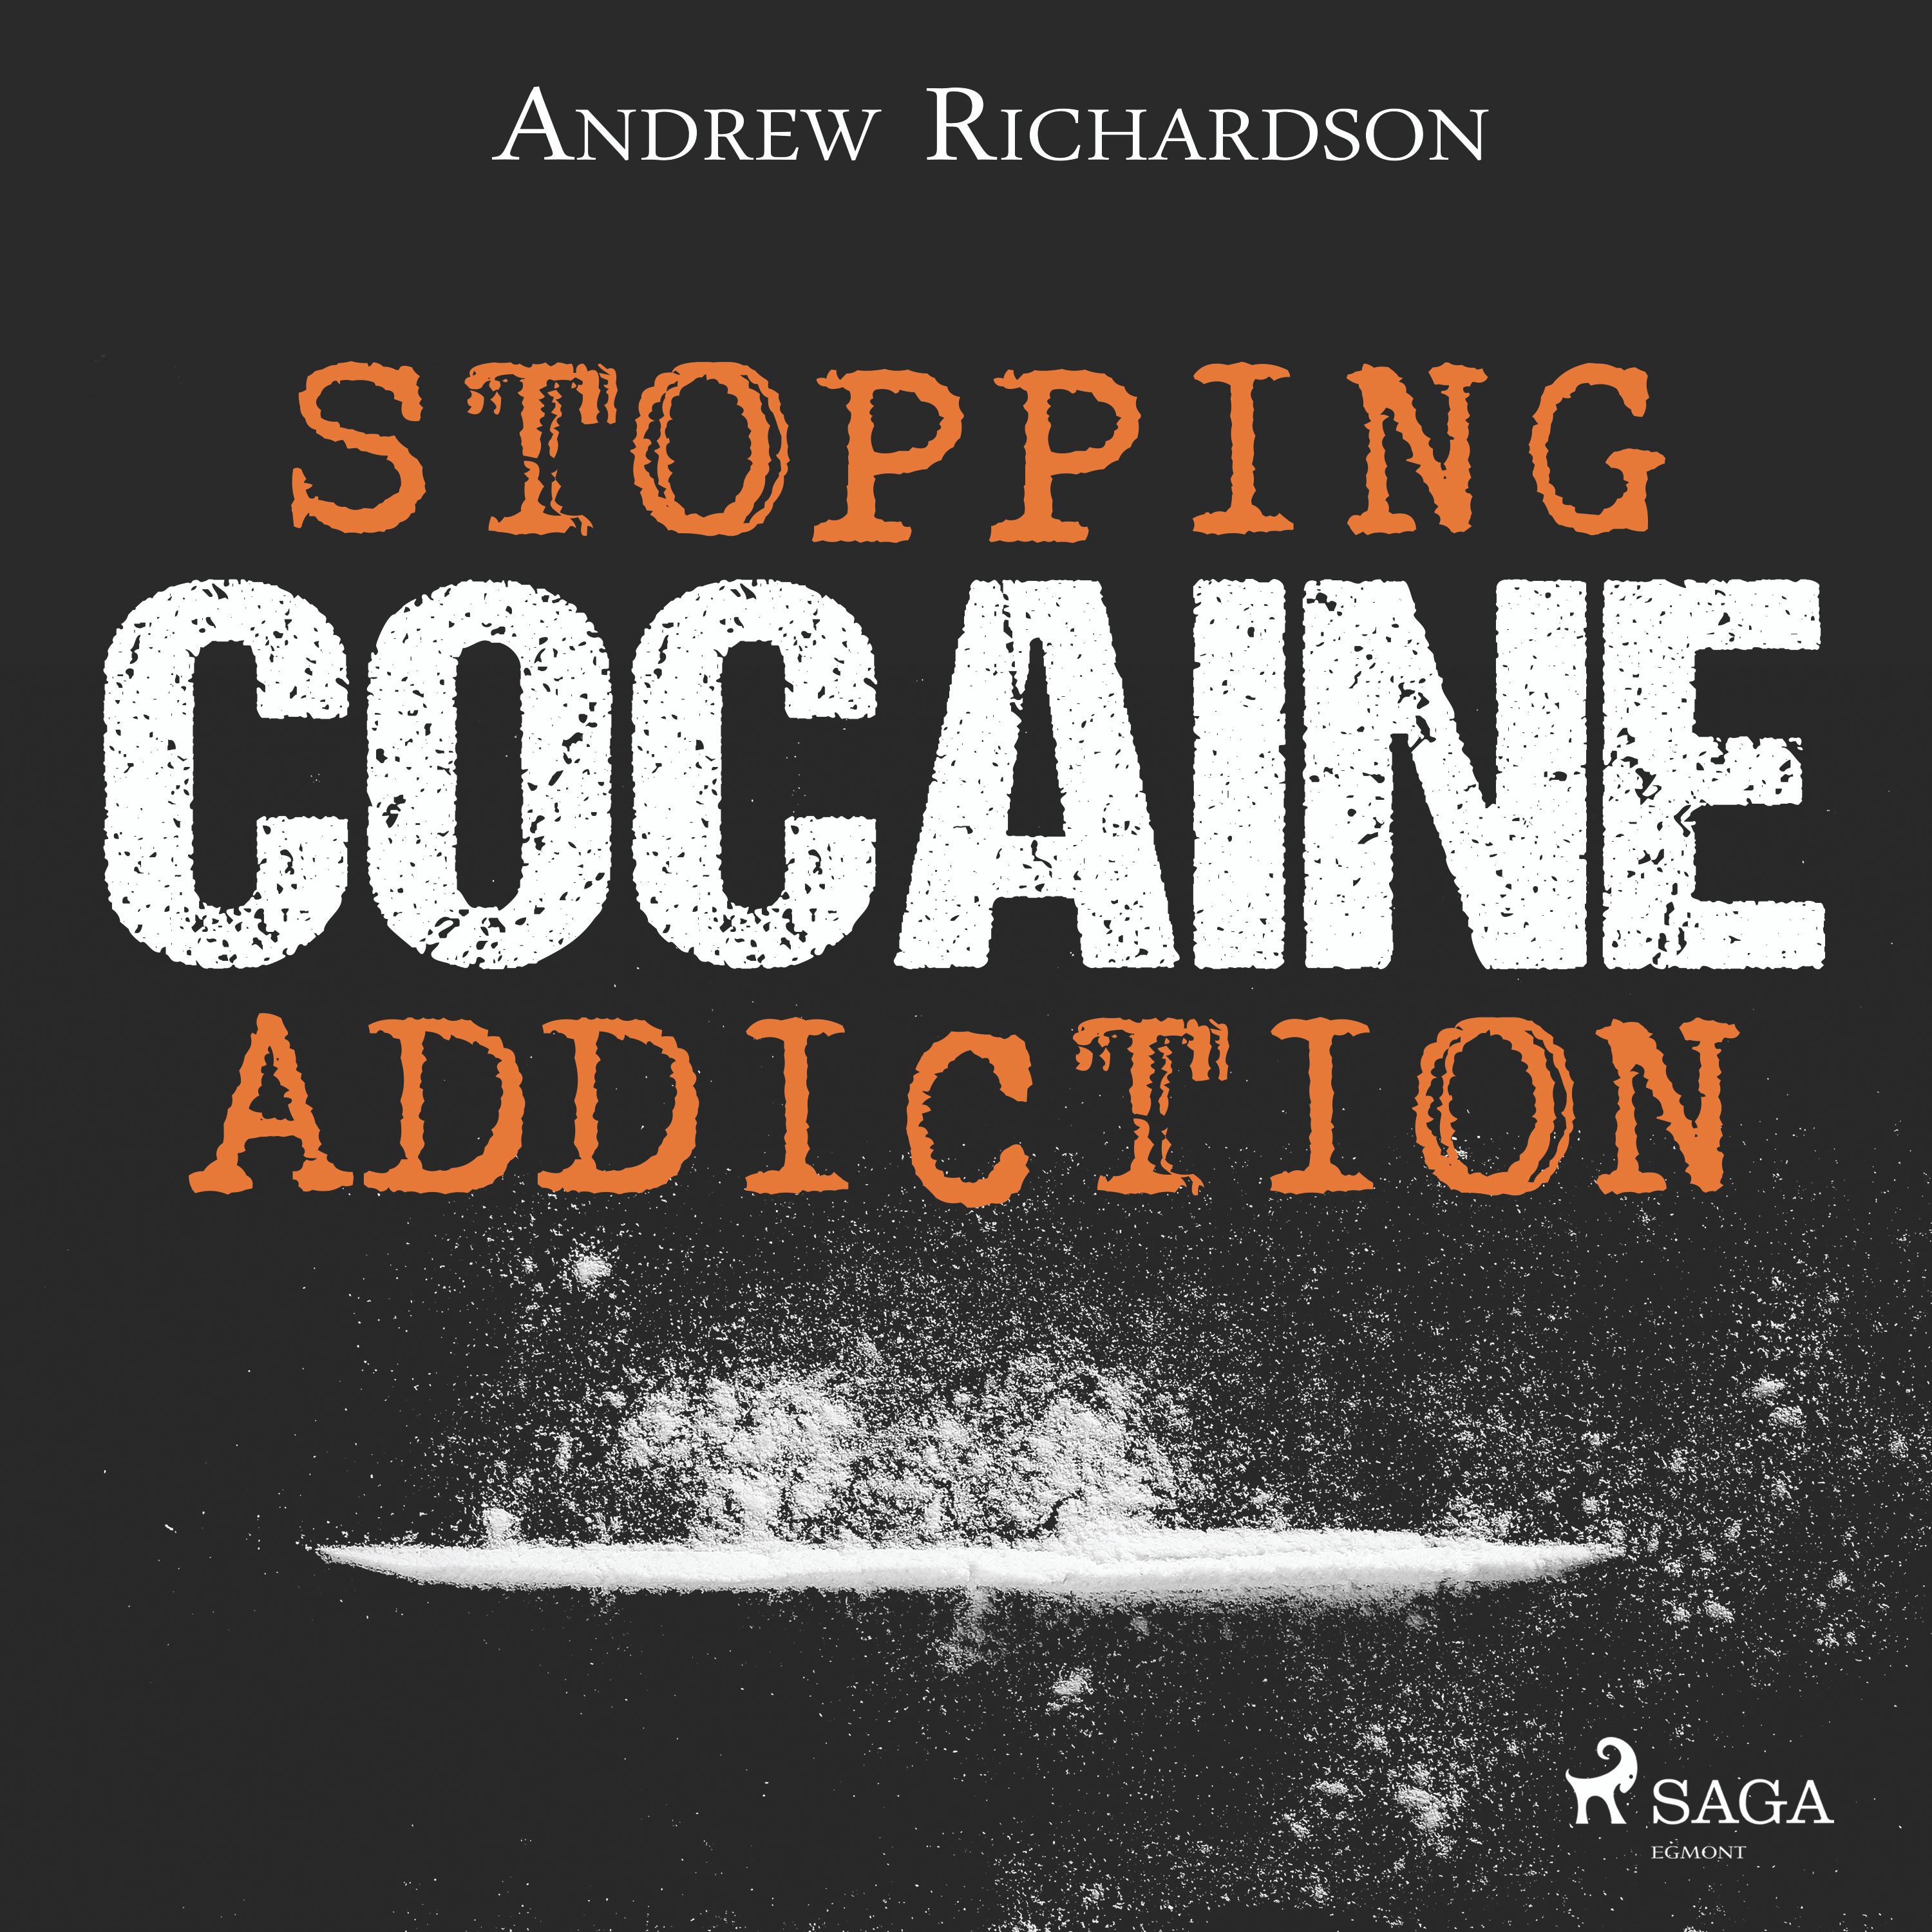 Stopping Cocaine Addiction, audiobook by Andrew Richardson